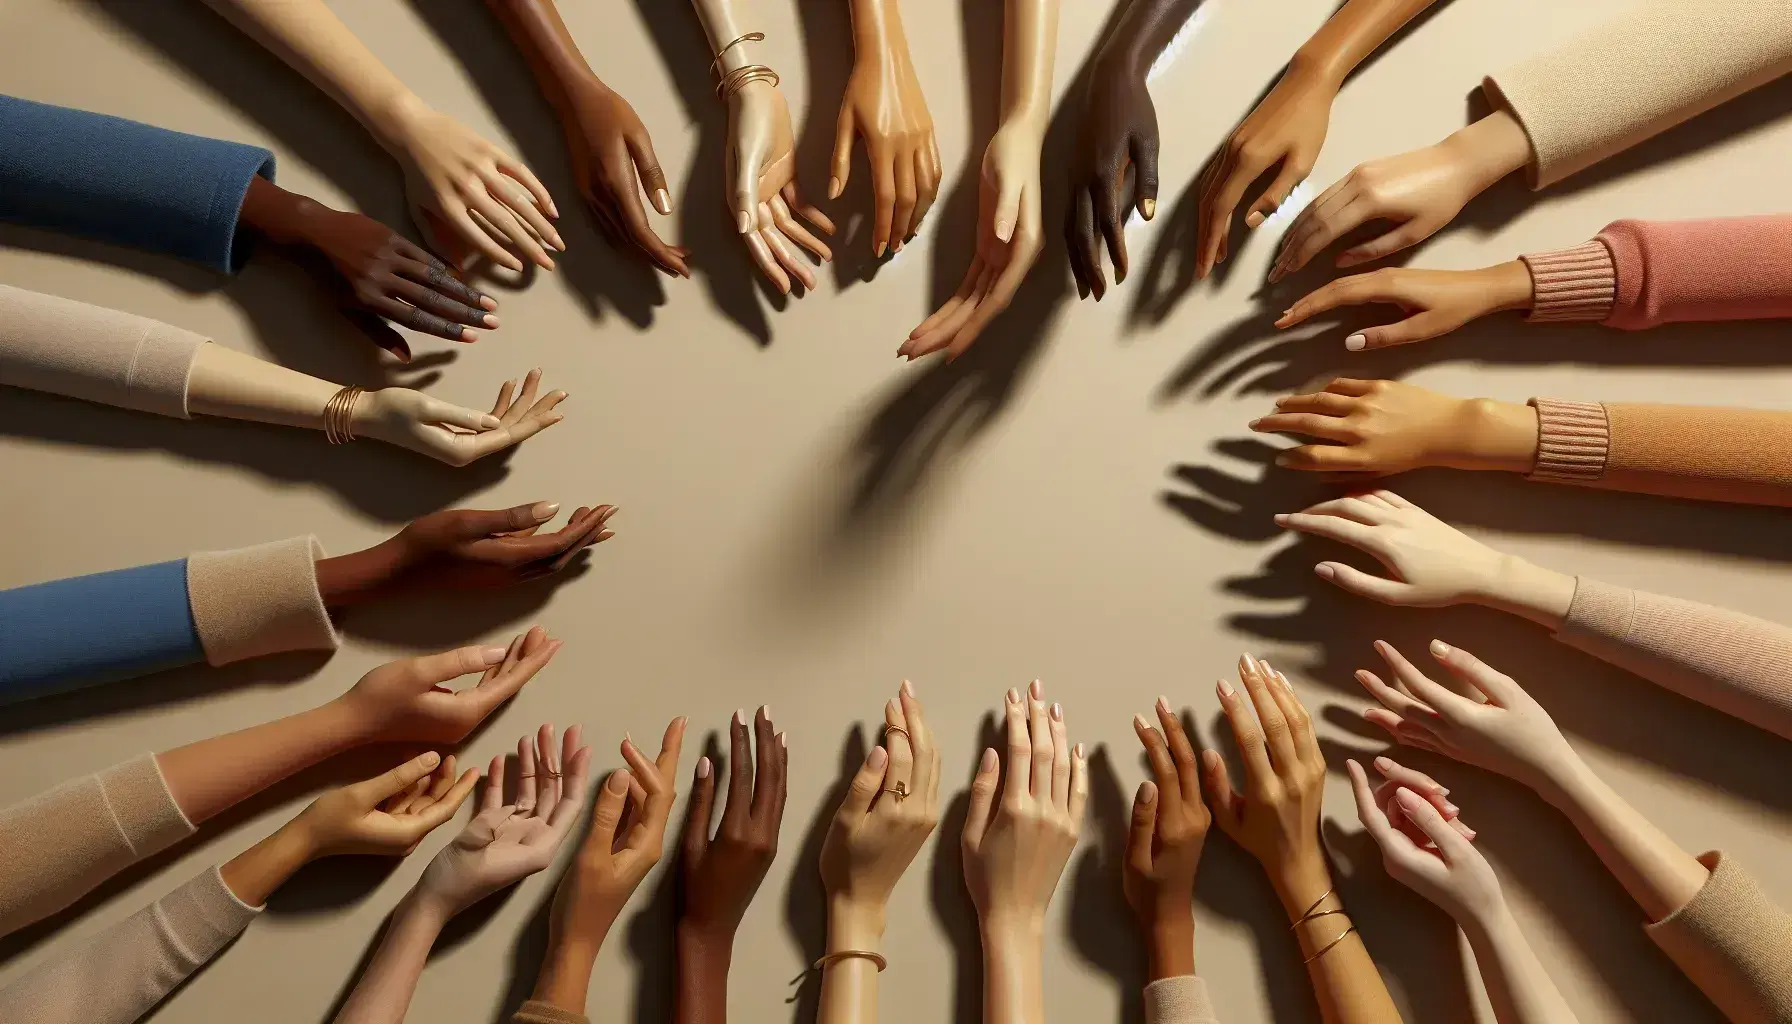 Hands of different people reaching towards the center on a neutral background, symbolizing unity and diversity, without flashy jewelry.